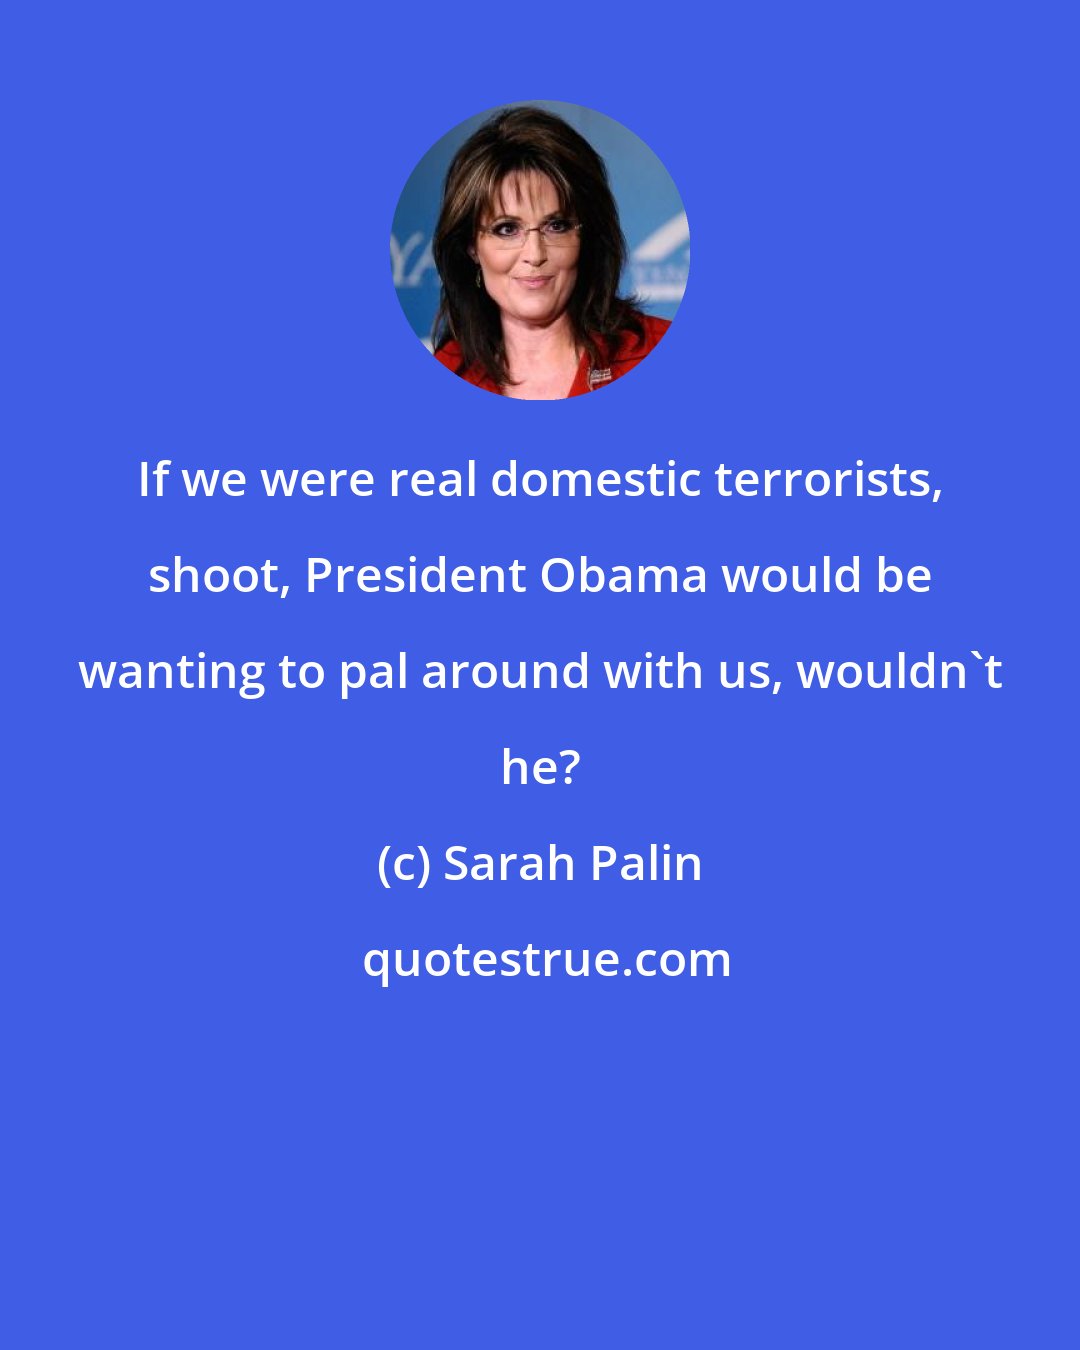 Sarah Palin: If we were real domestic terrorists, shoot, President Obama would be wanting to pal around with us, wouldn't he?